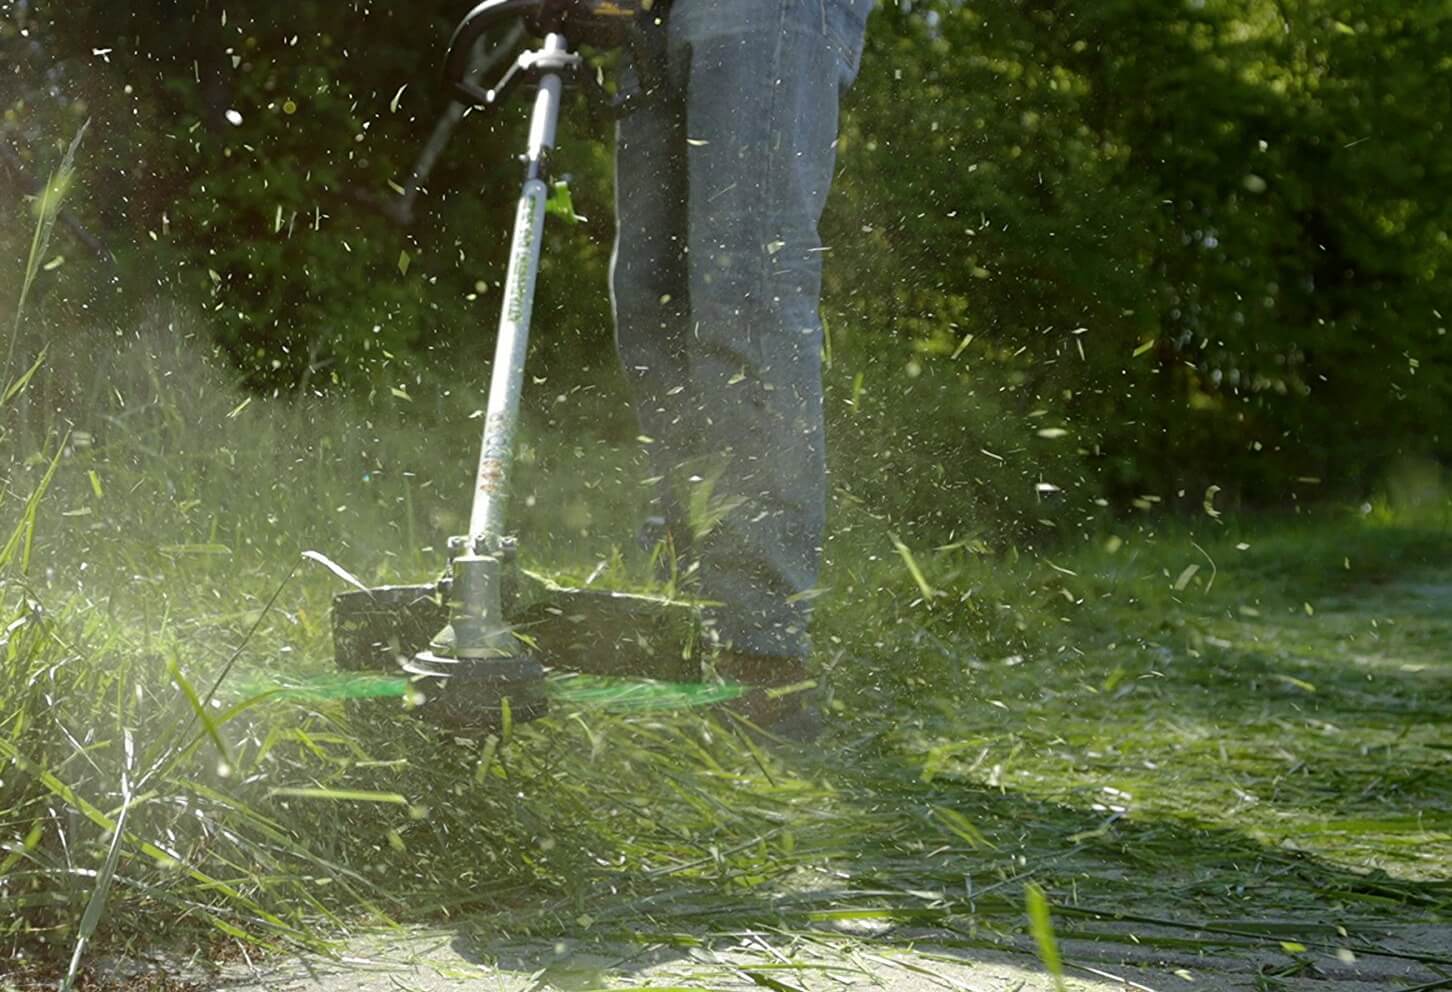 How to Use a String Trimmer like a Pro